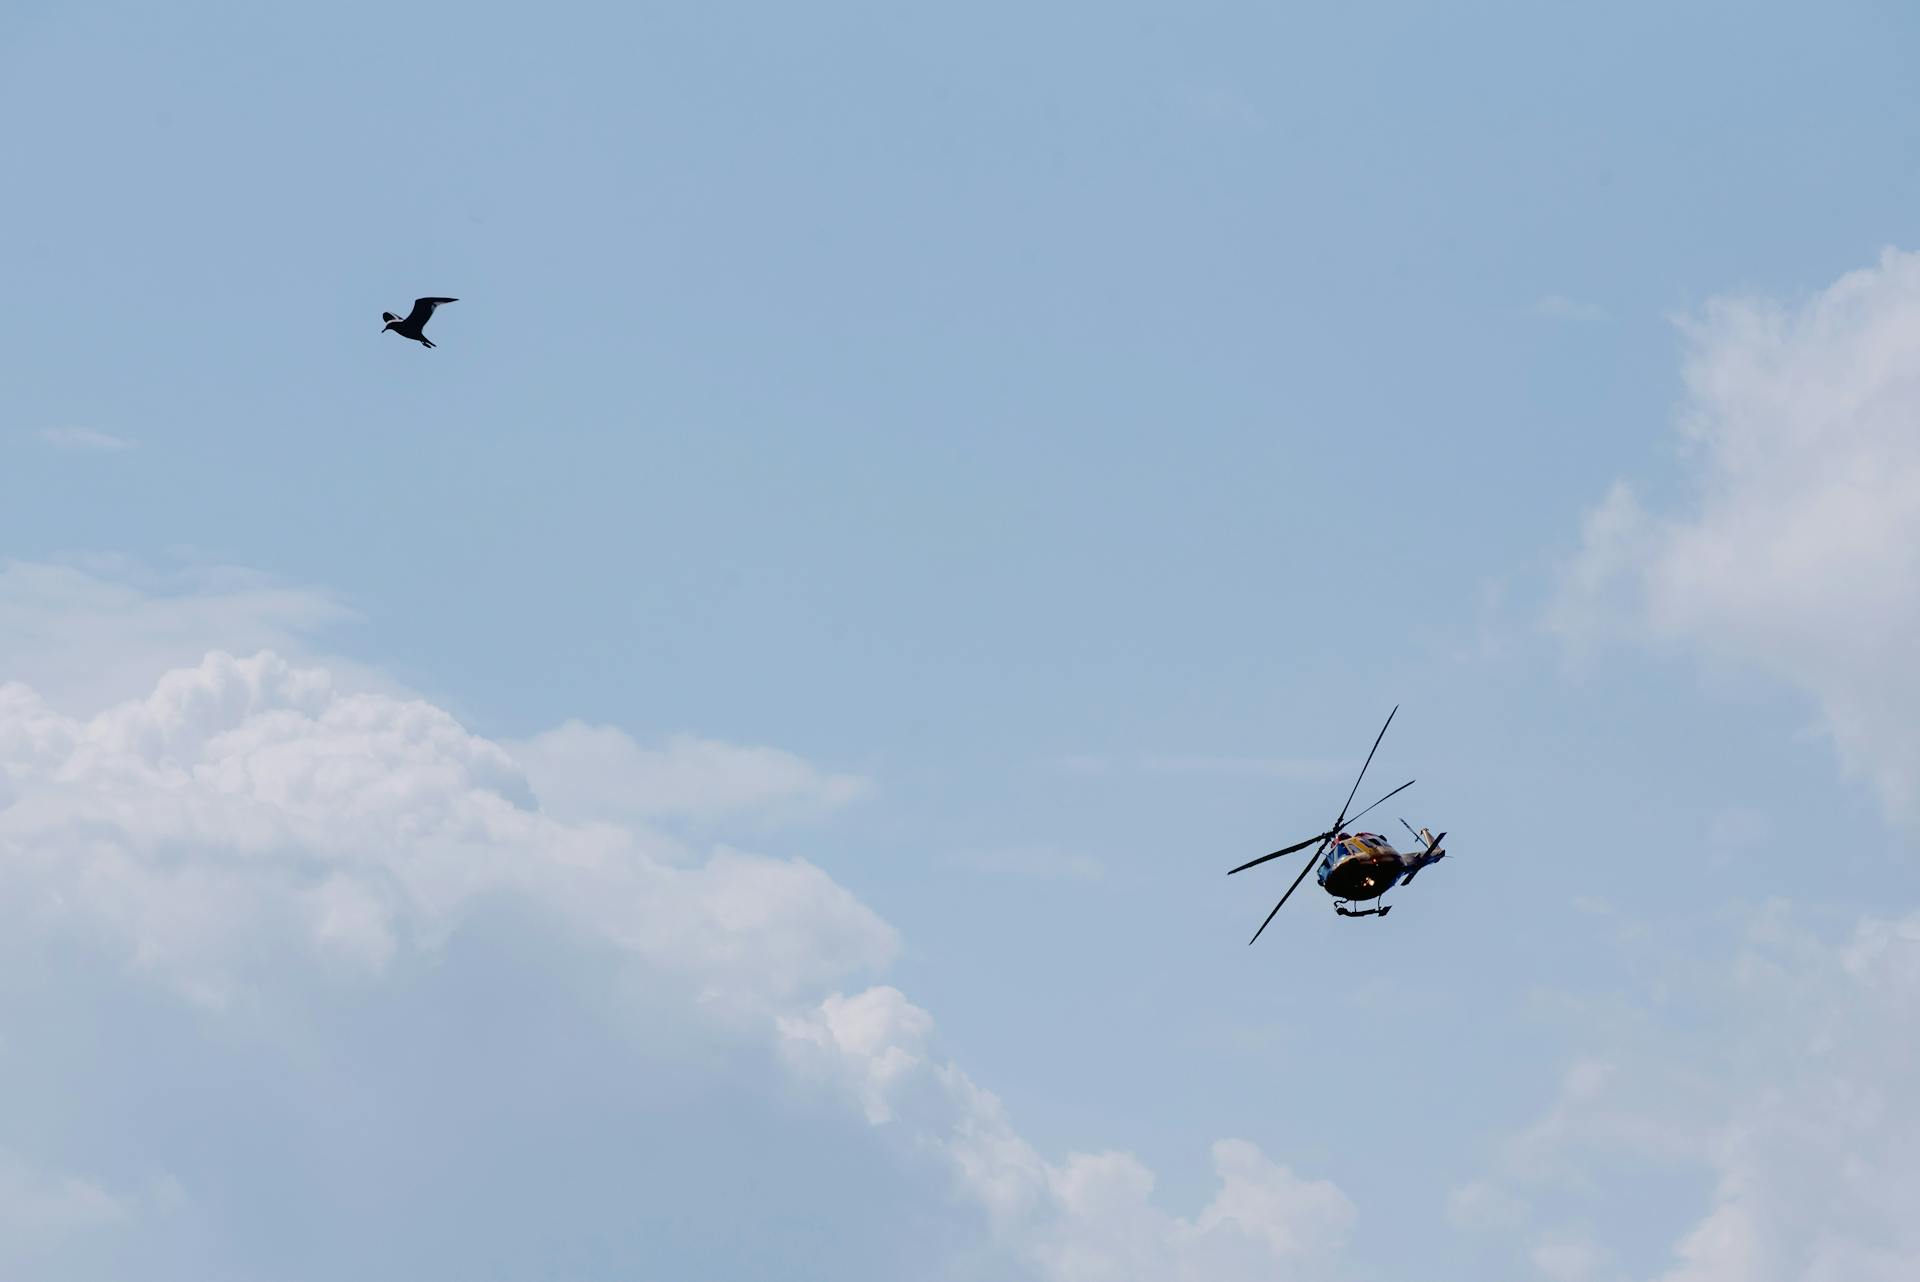 Military helicopter and bird flying in cloudy sky